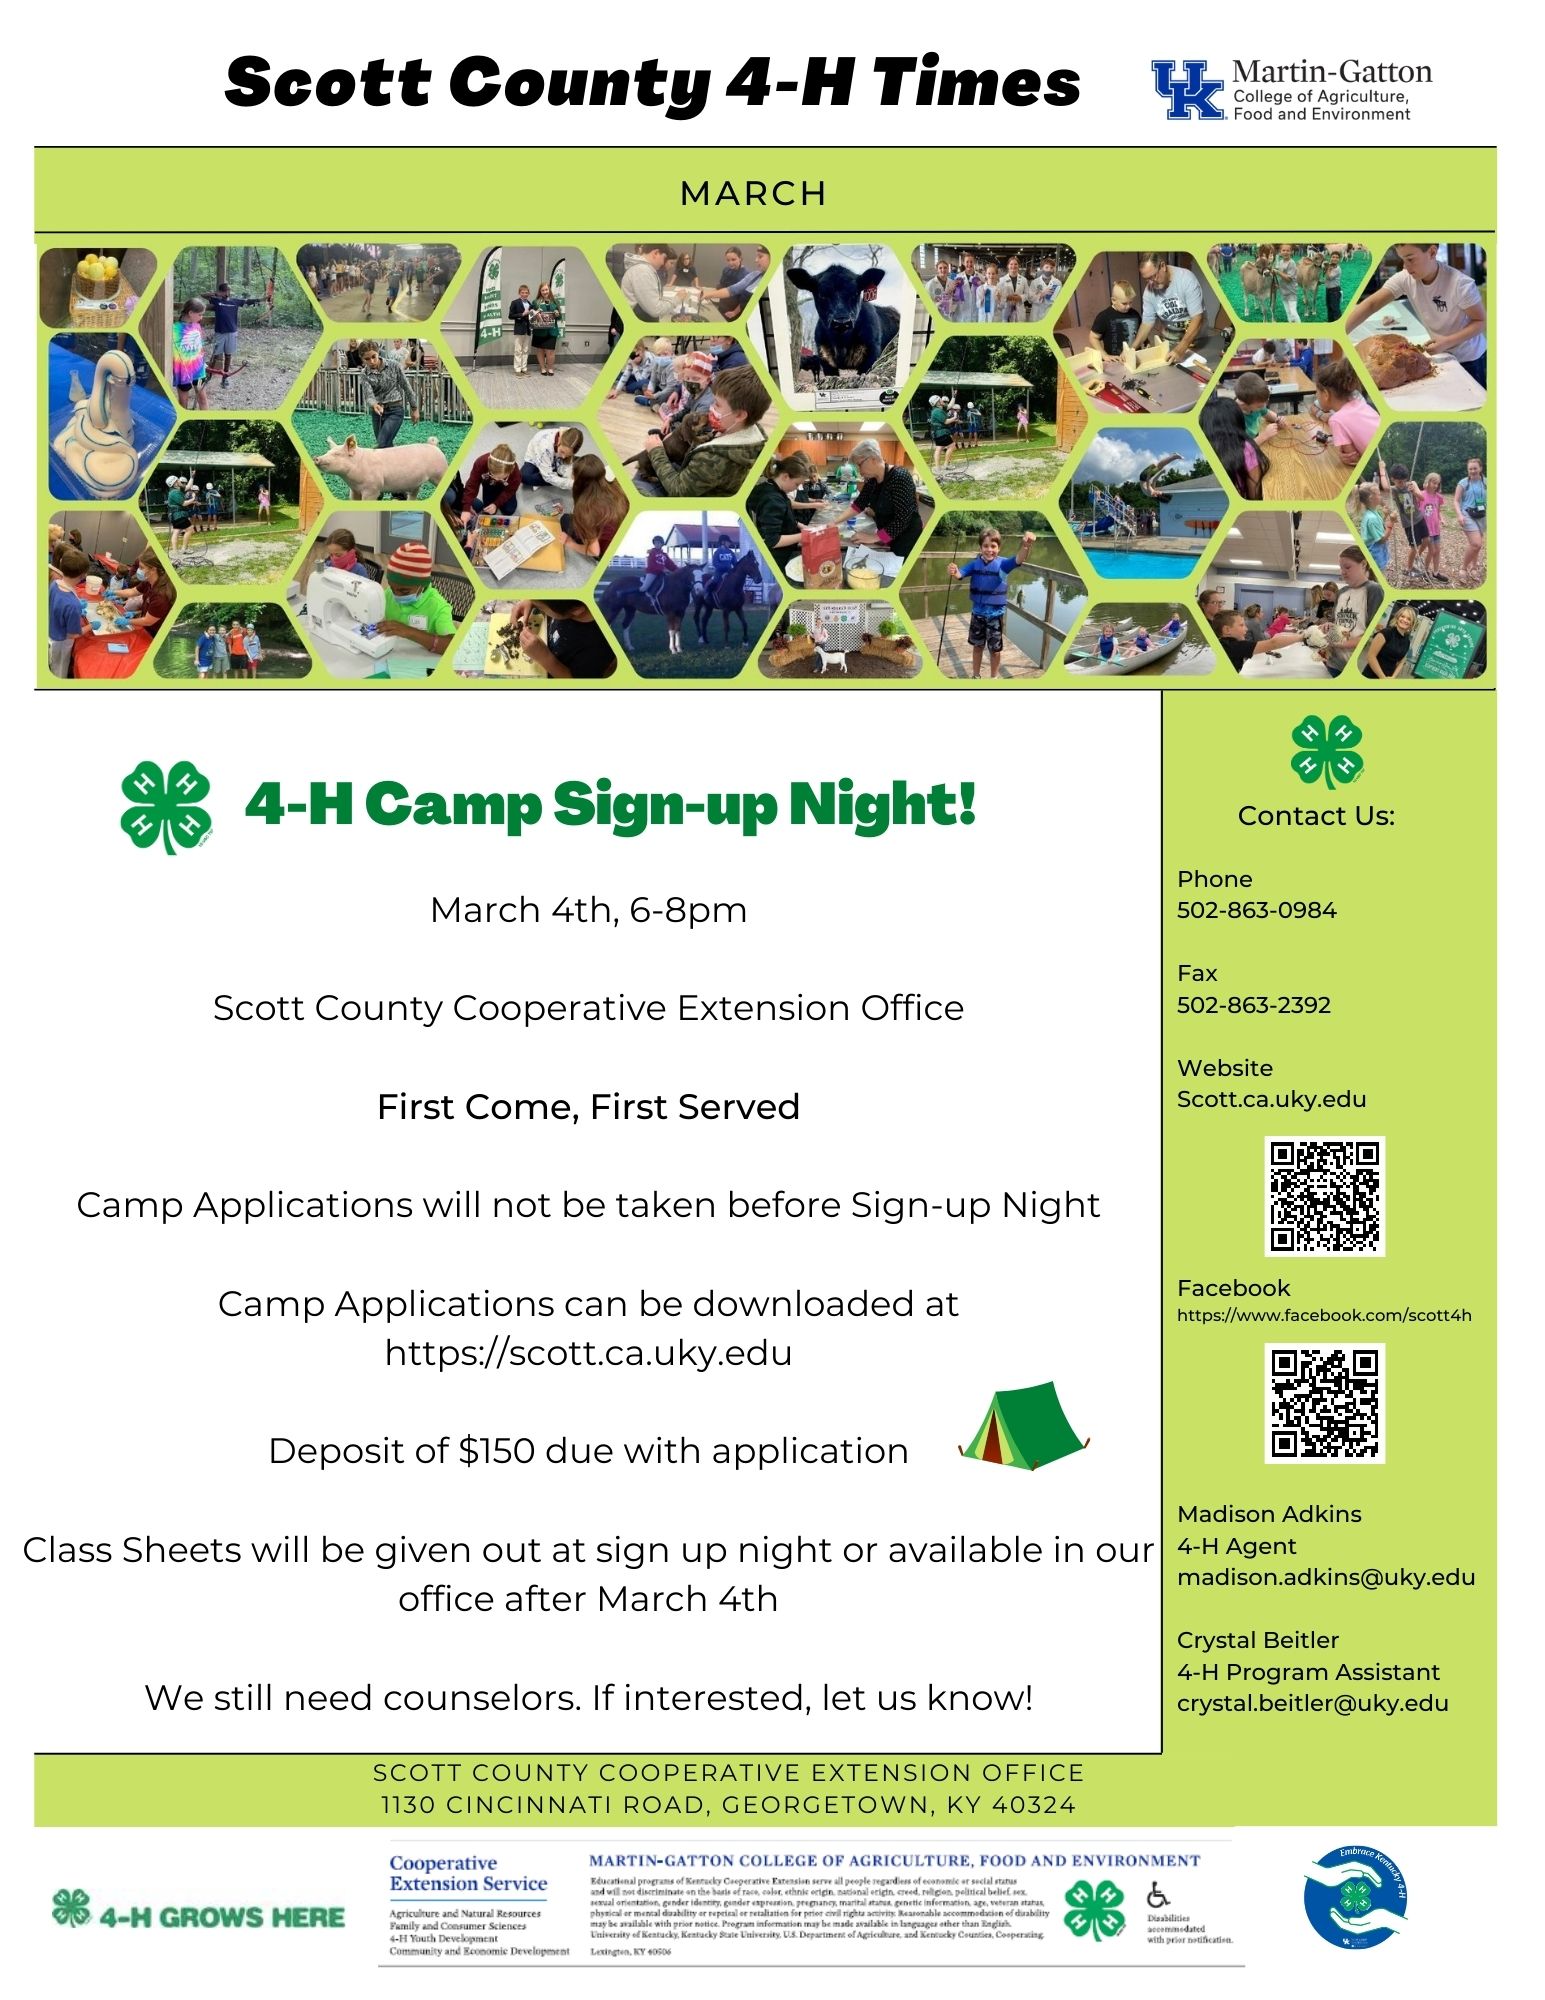 Preview of the Scott County 4-H March Newsletter